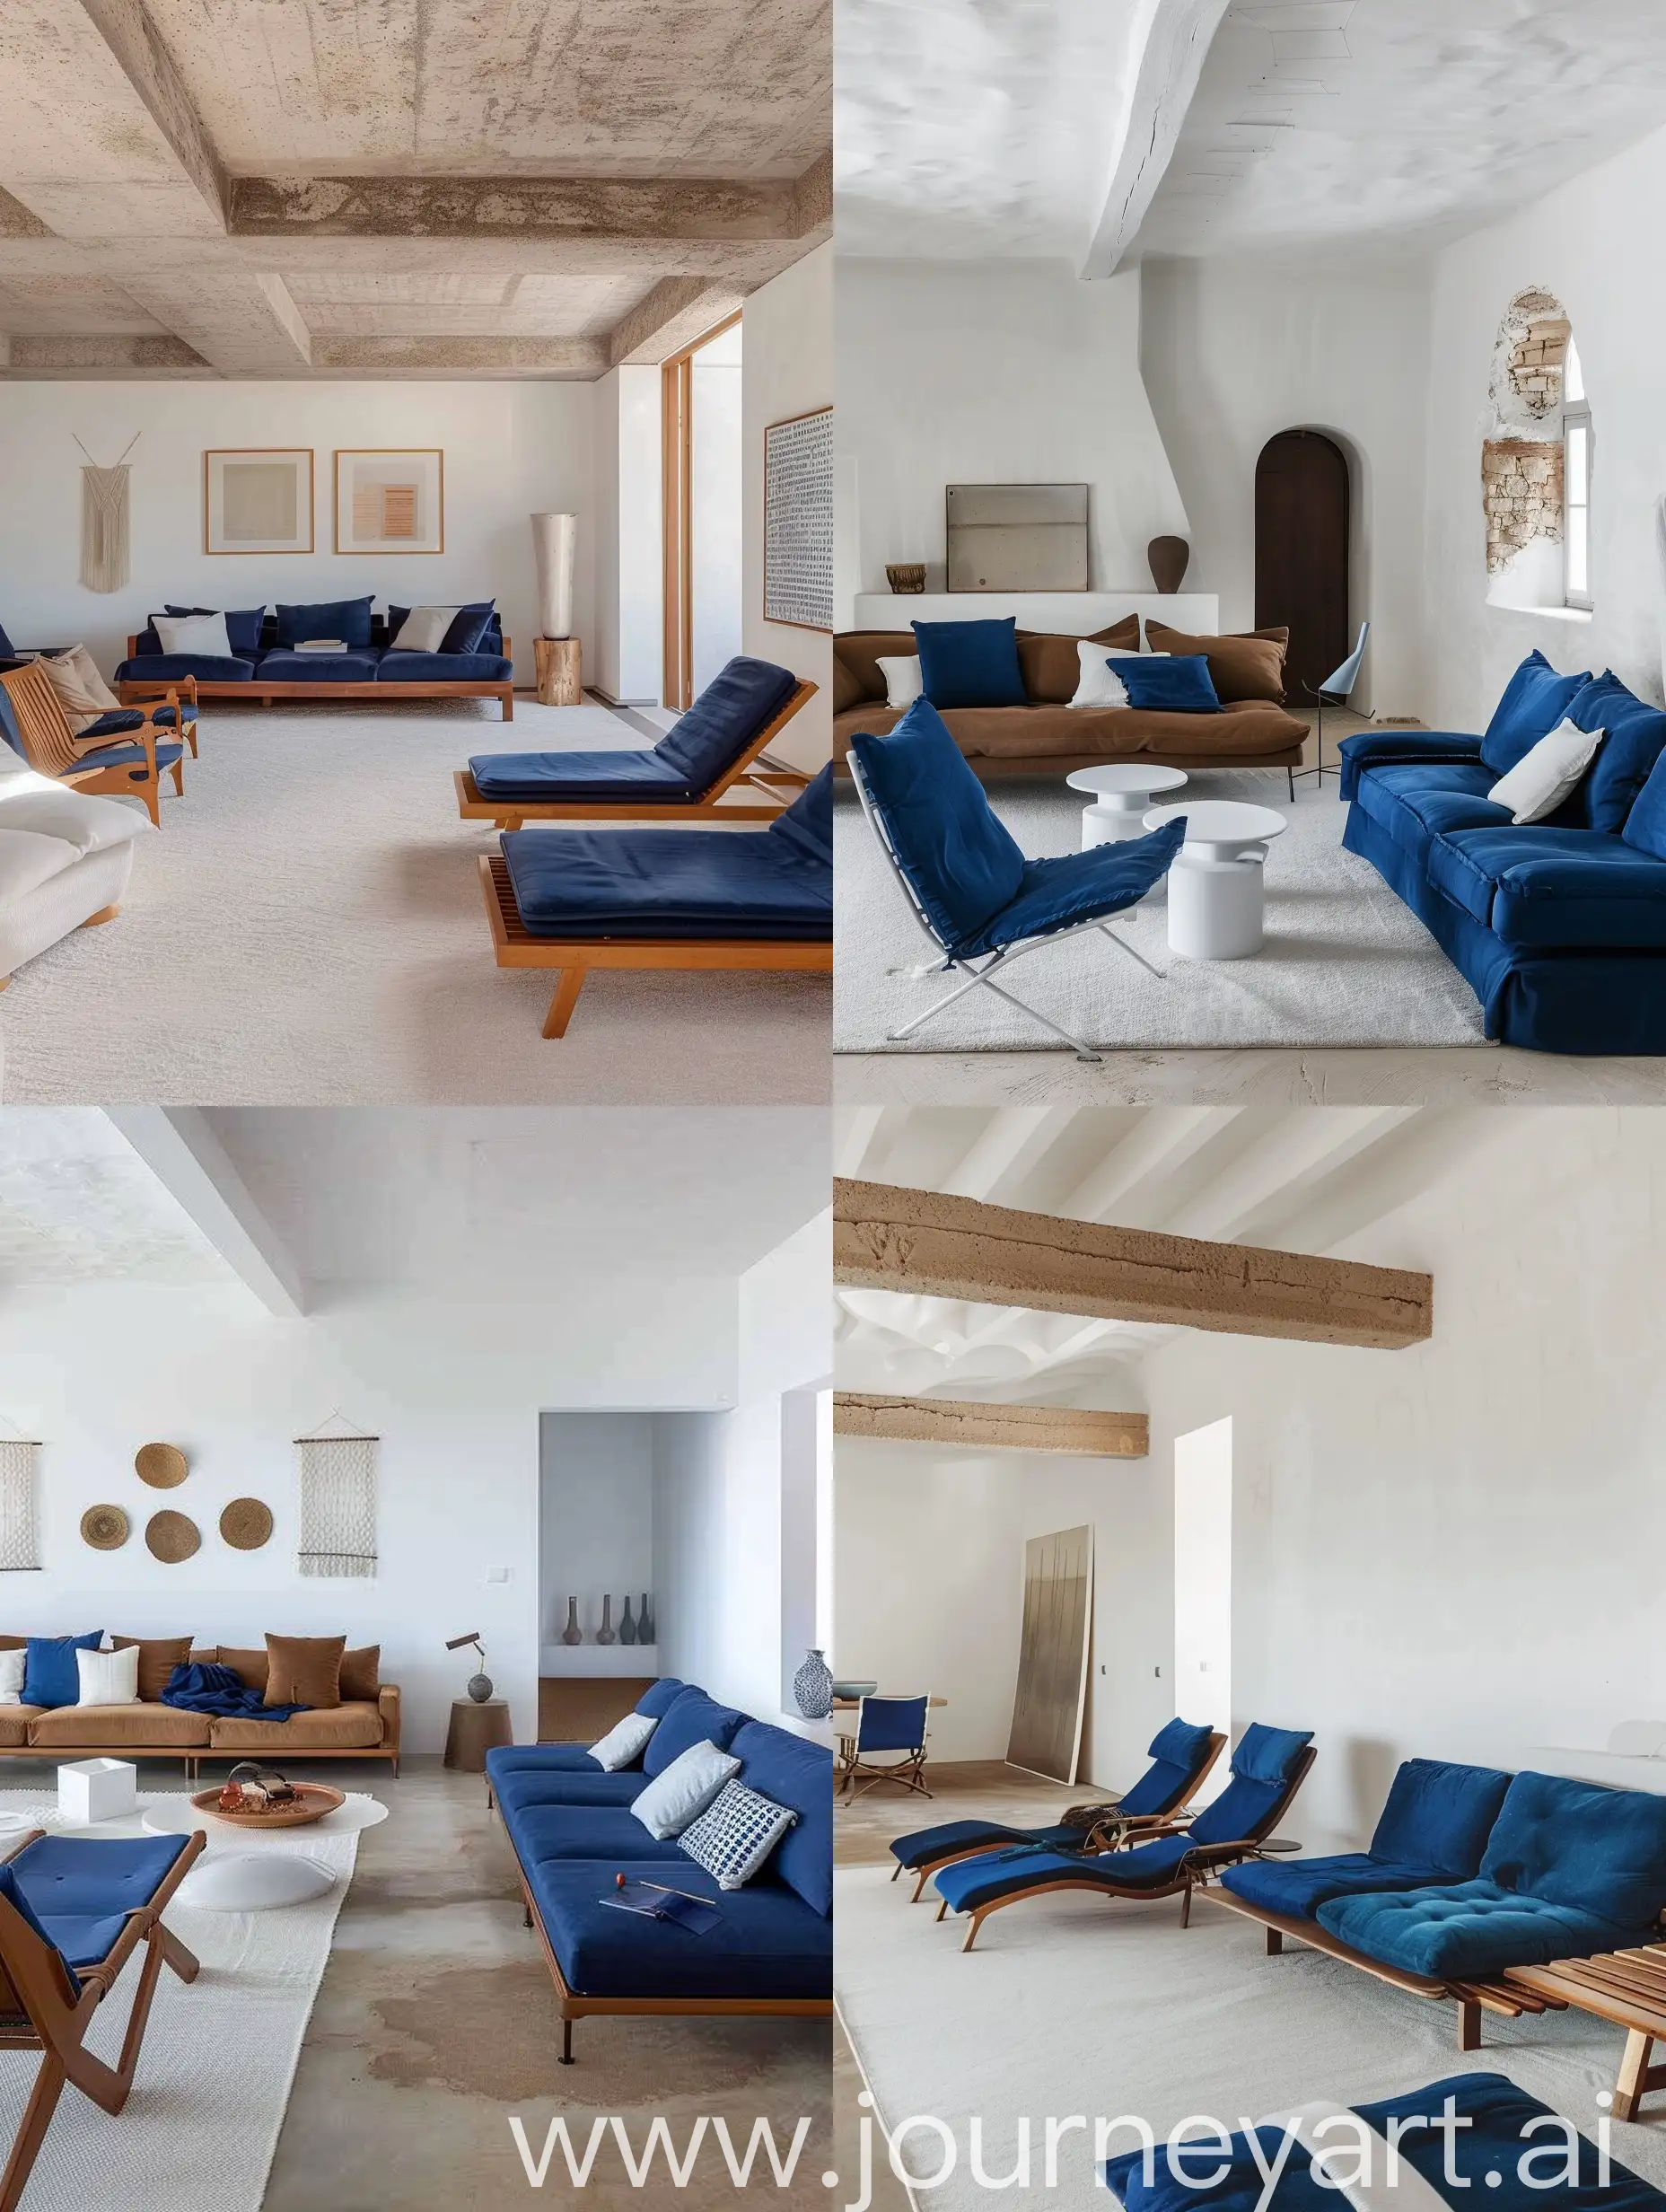 Minimal Living room white wall furniture brown. Blue Sofa and blue lounge chairs. White carpet. Decoration white and blue.  Floor beige concrete